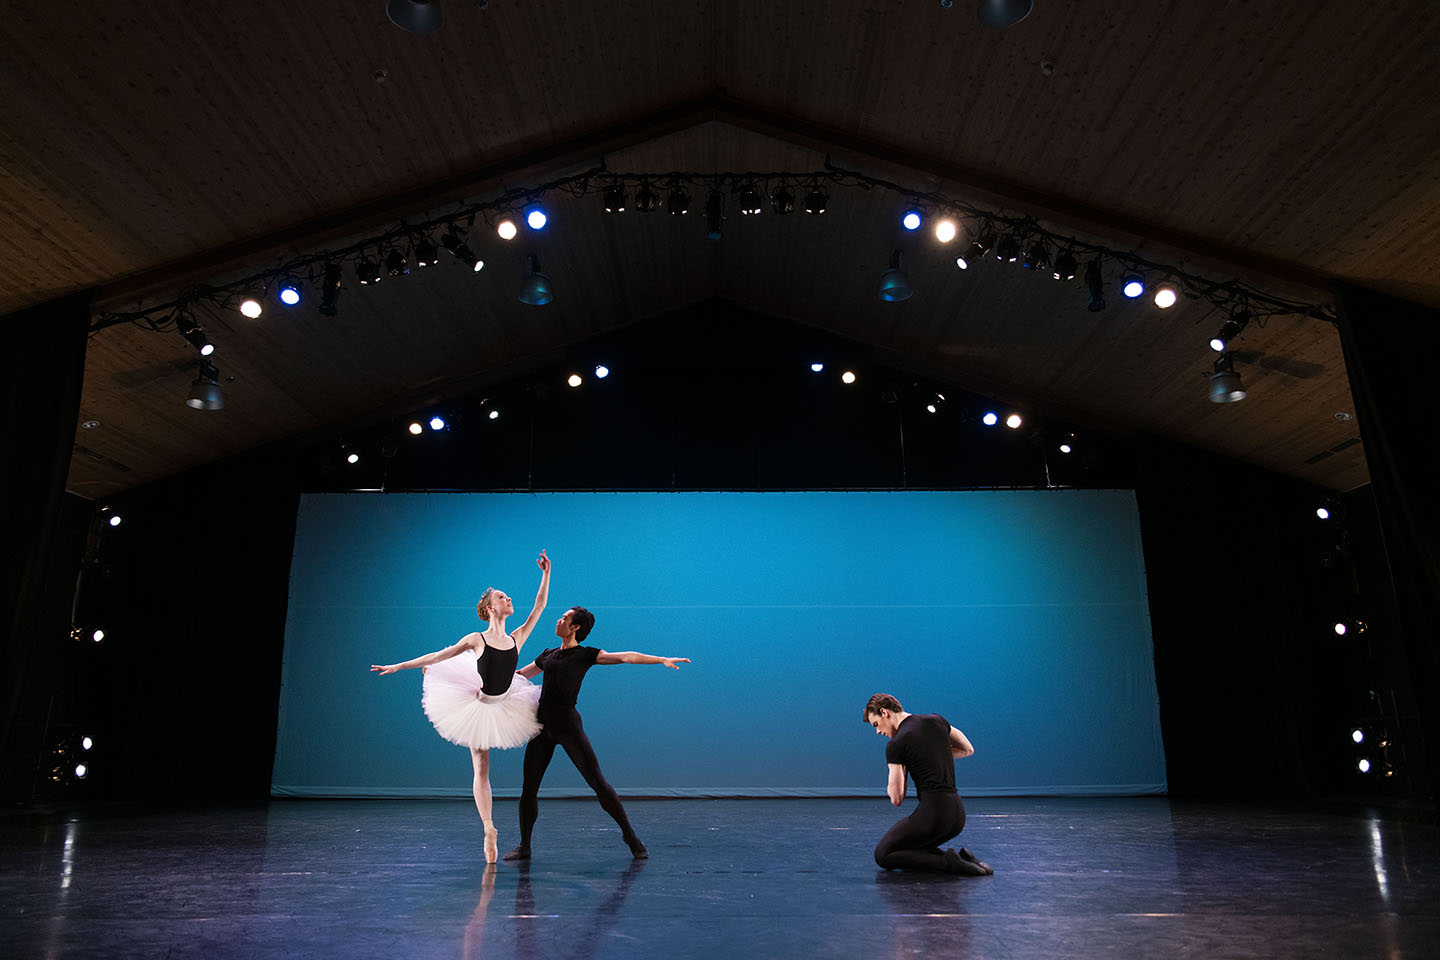 Elisabeth Beyer, Elwince Magbitang, and Jake Roxander in the Le Corsaire Suite. Photo: Avery Brunkus.